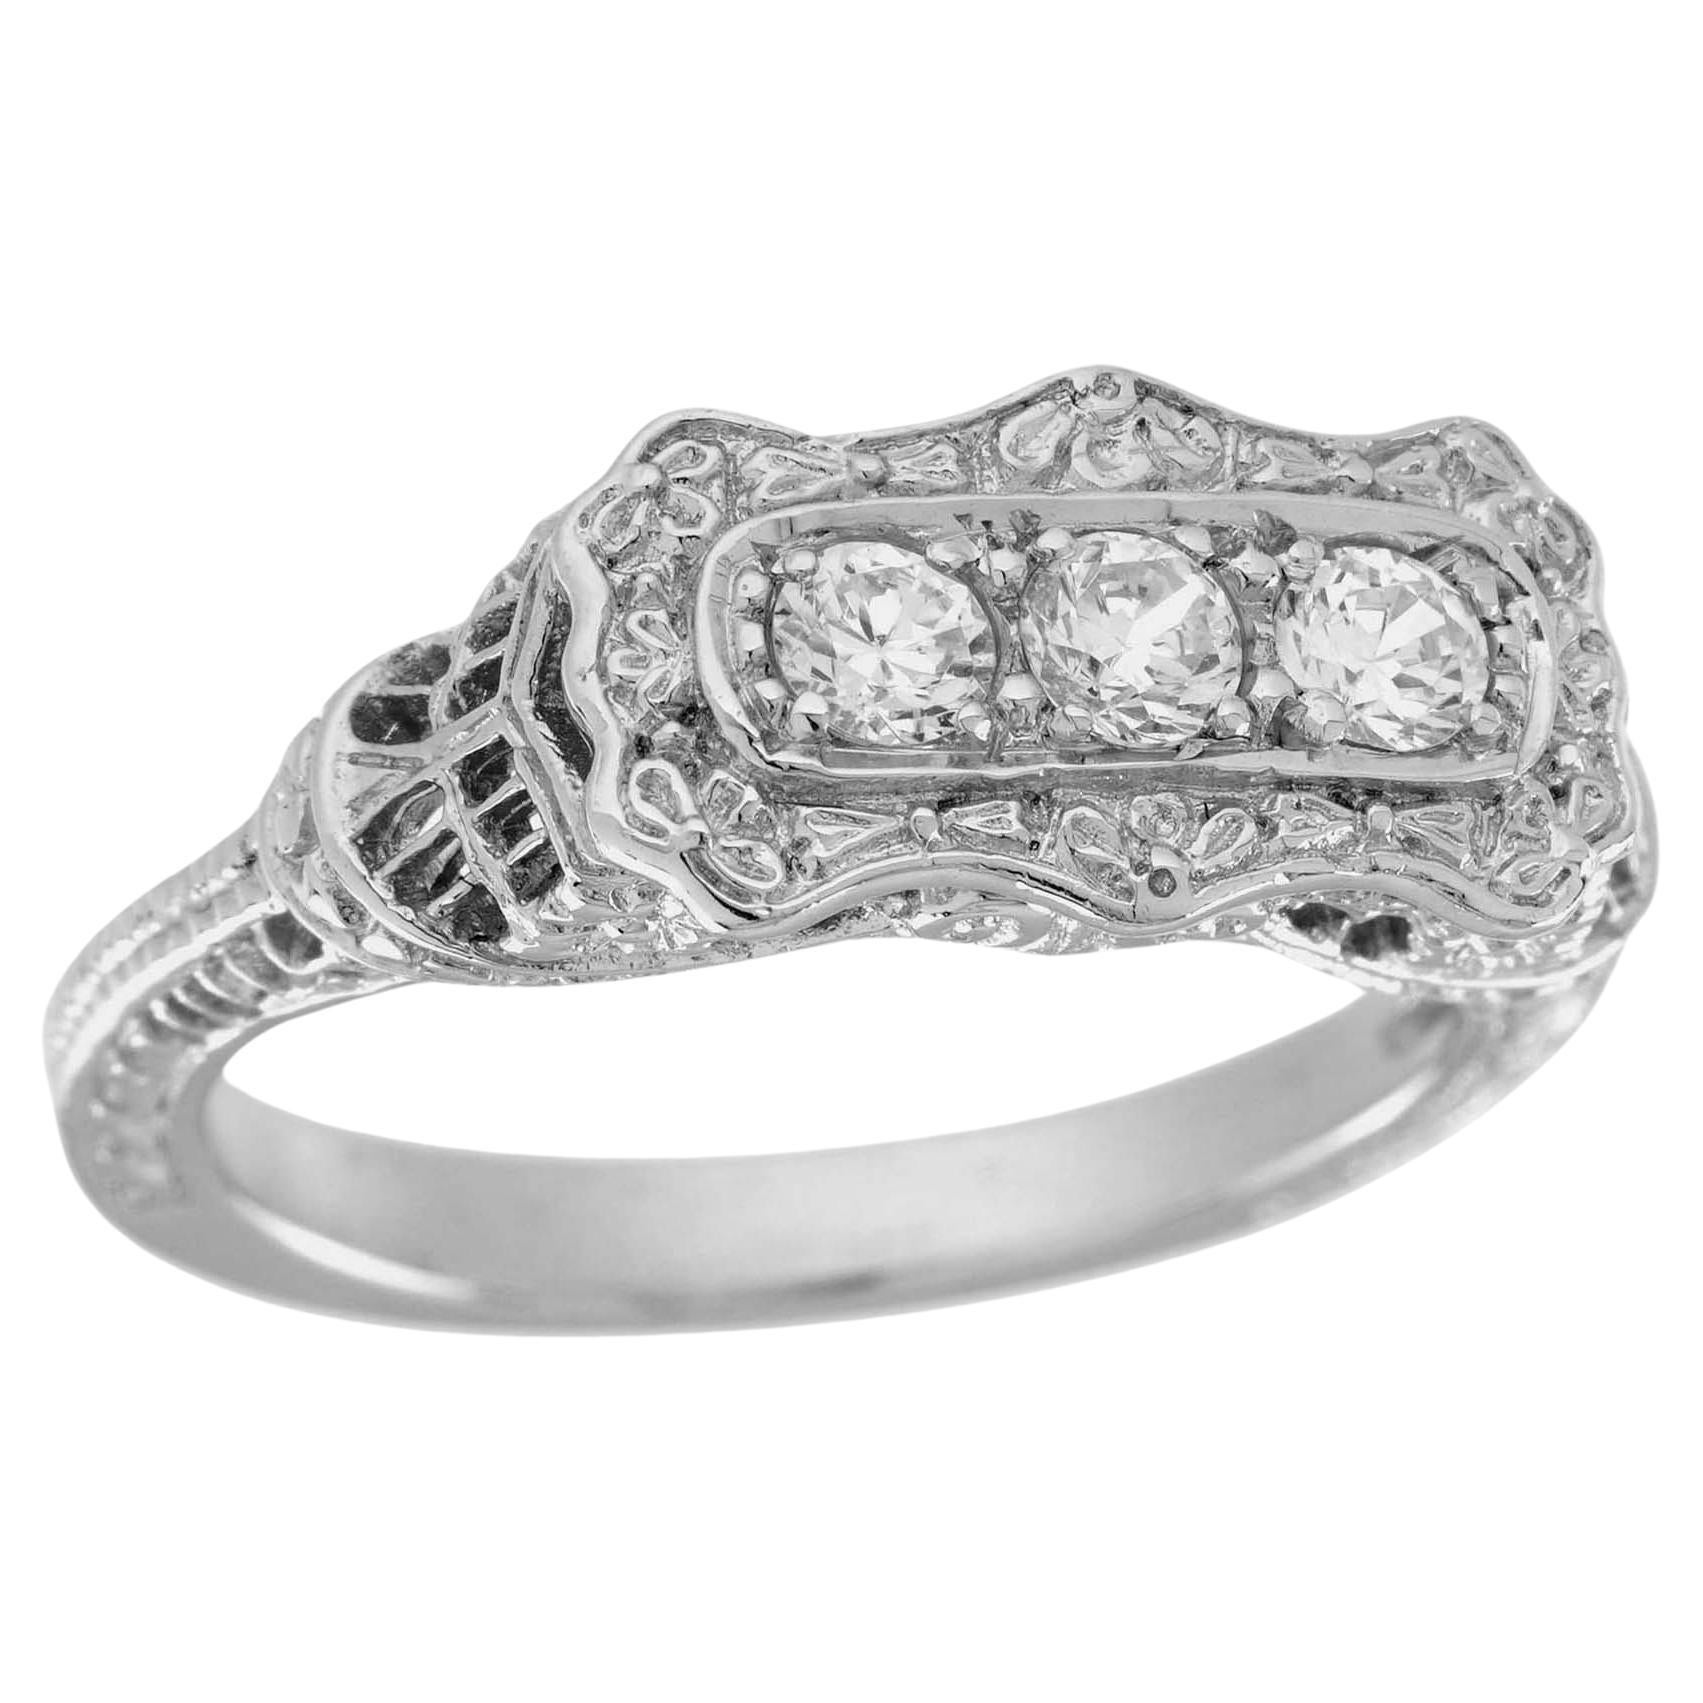 For Sale:  Diamond Vintage Style Filigree Three Stone Ring in Solid 14K White Gold